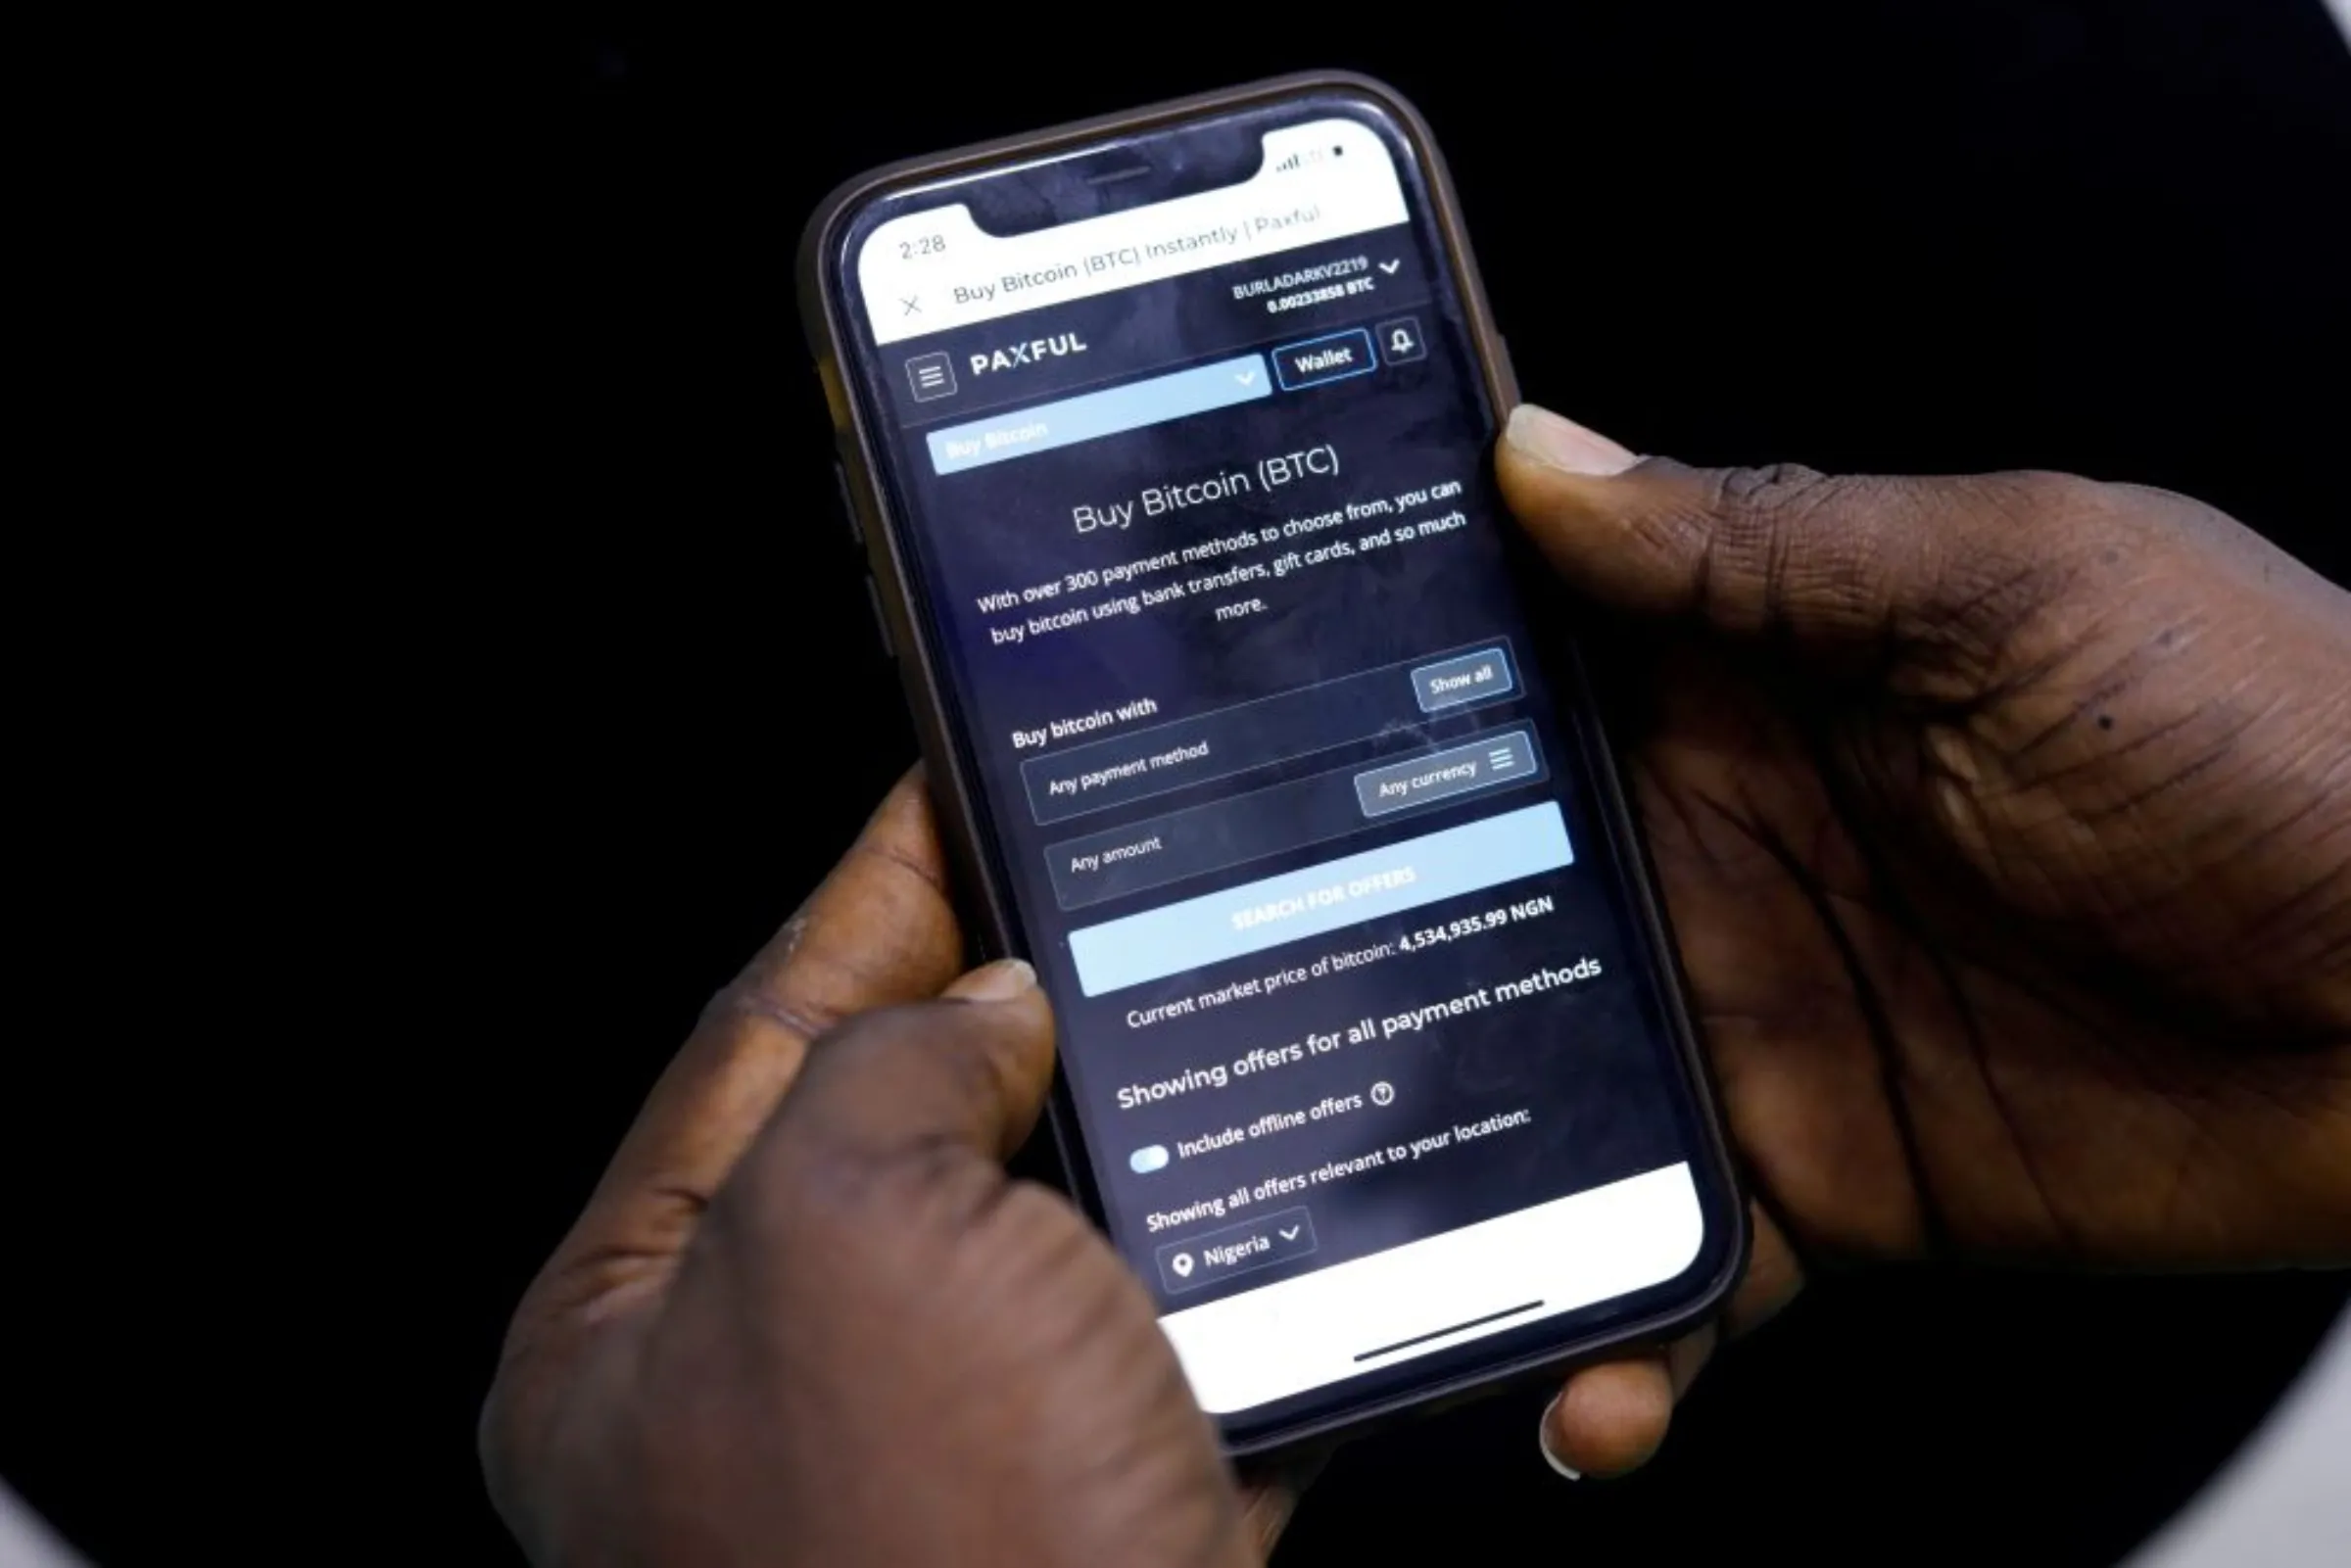 Abolaji Odunjo, a gadget vendor who trades with bitcoin, demonstrates a bitcoin application on his mobile phone in Lagos, Nigeria August 31, 2020. REUTERS/Temilade Adelaja